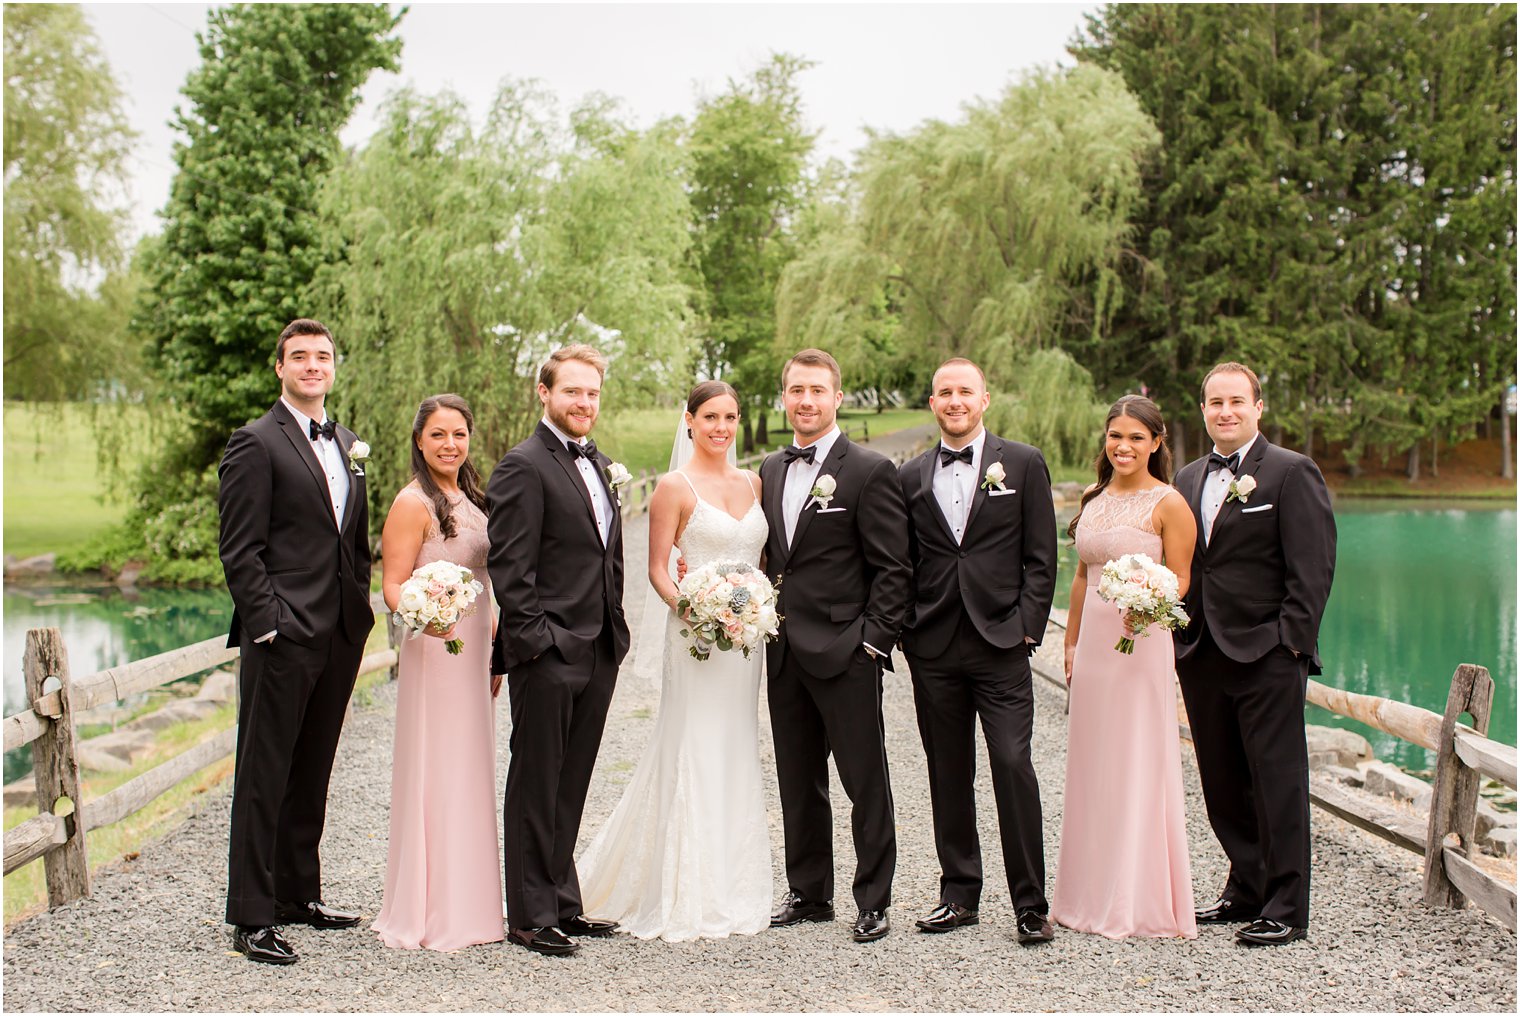 Classic black tie wedding with pink bridesmaid dresses | Photos by Idalia Photography